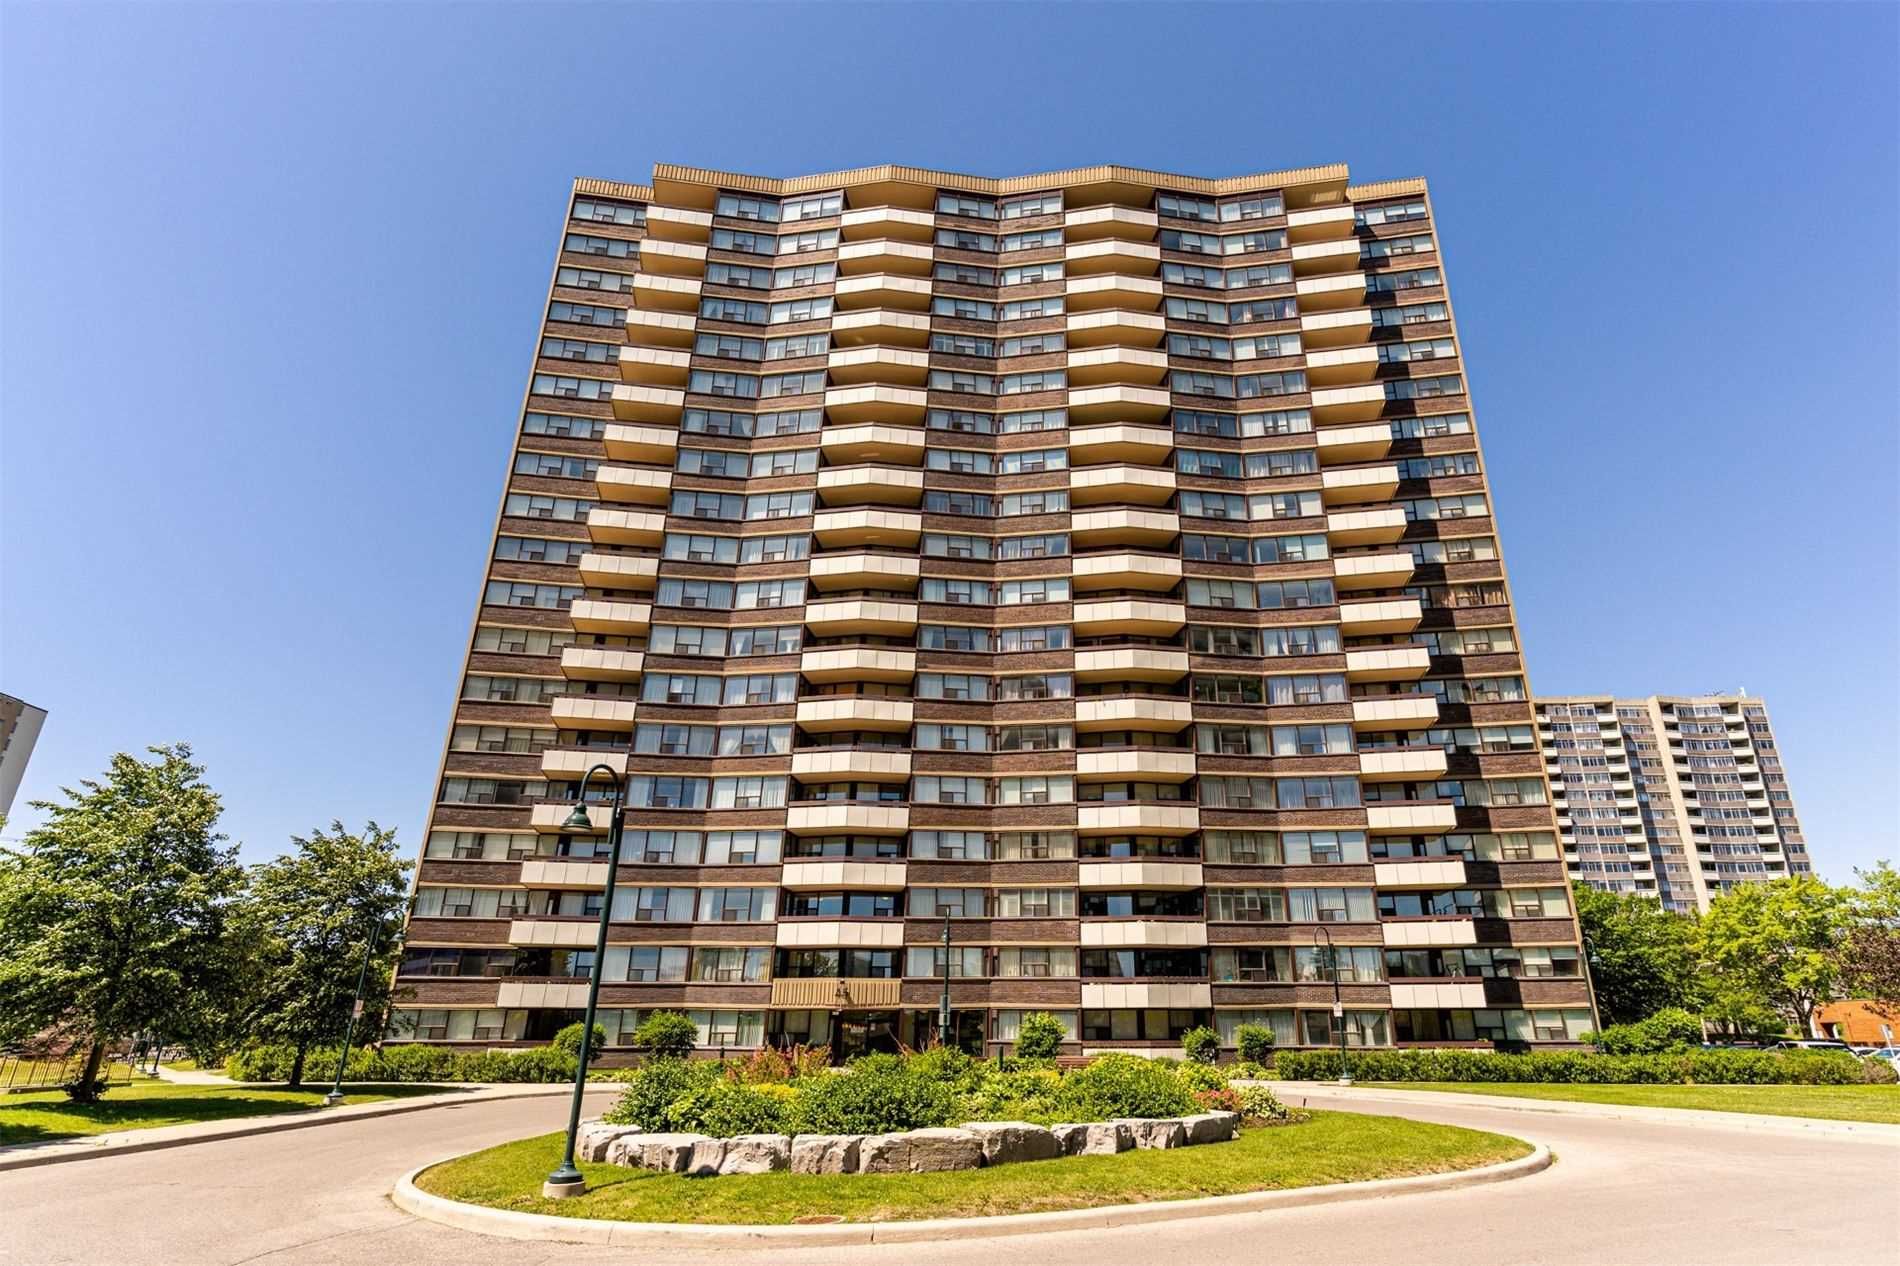 45-65 Huntingdale Blvd. This condo at Royal Crest III Condos is located in  Scarborough, Toronto - image #1 of 2 by Strata.ca